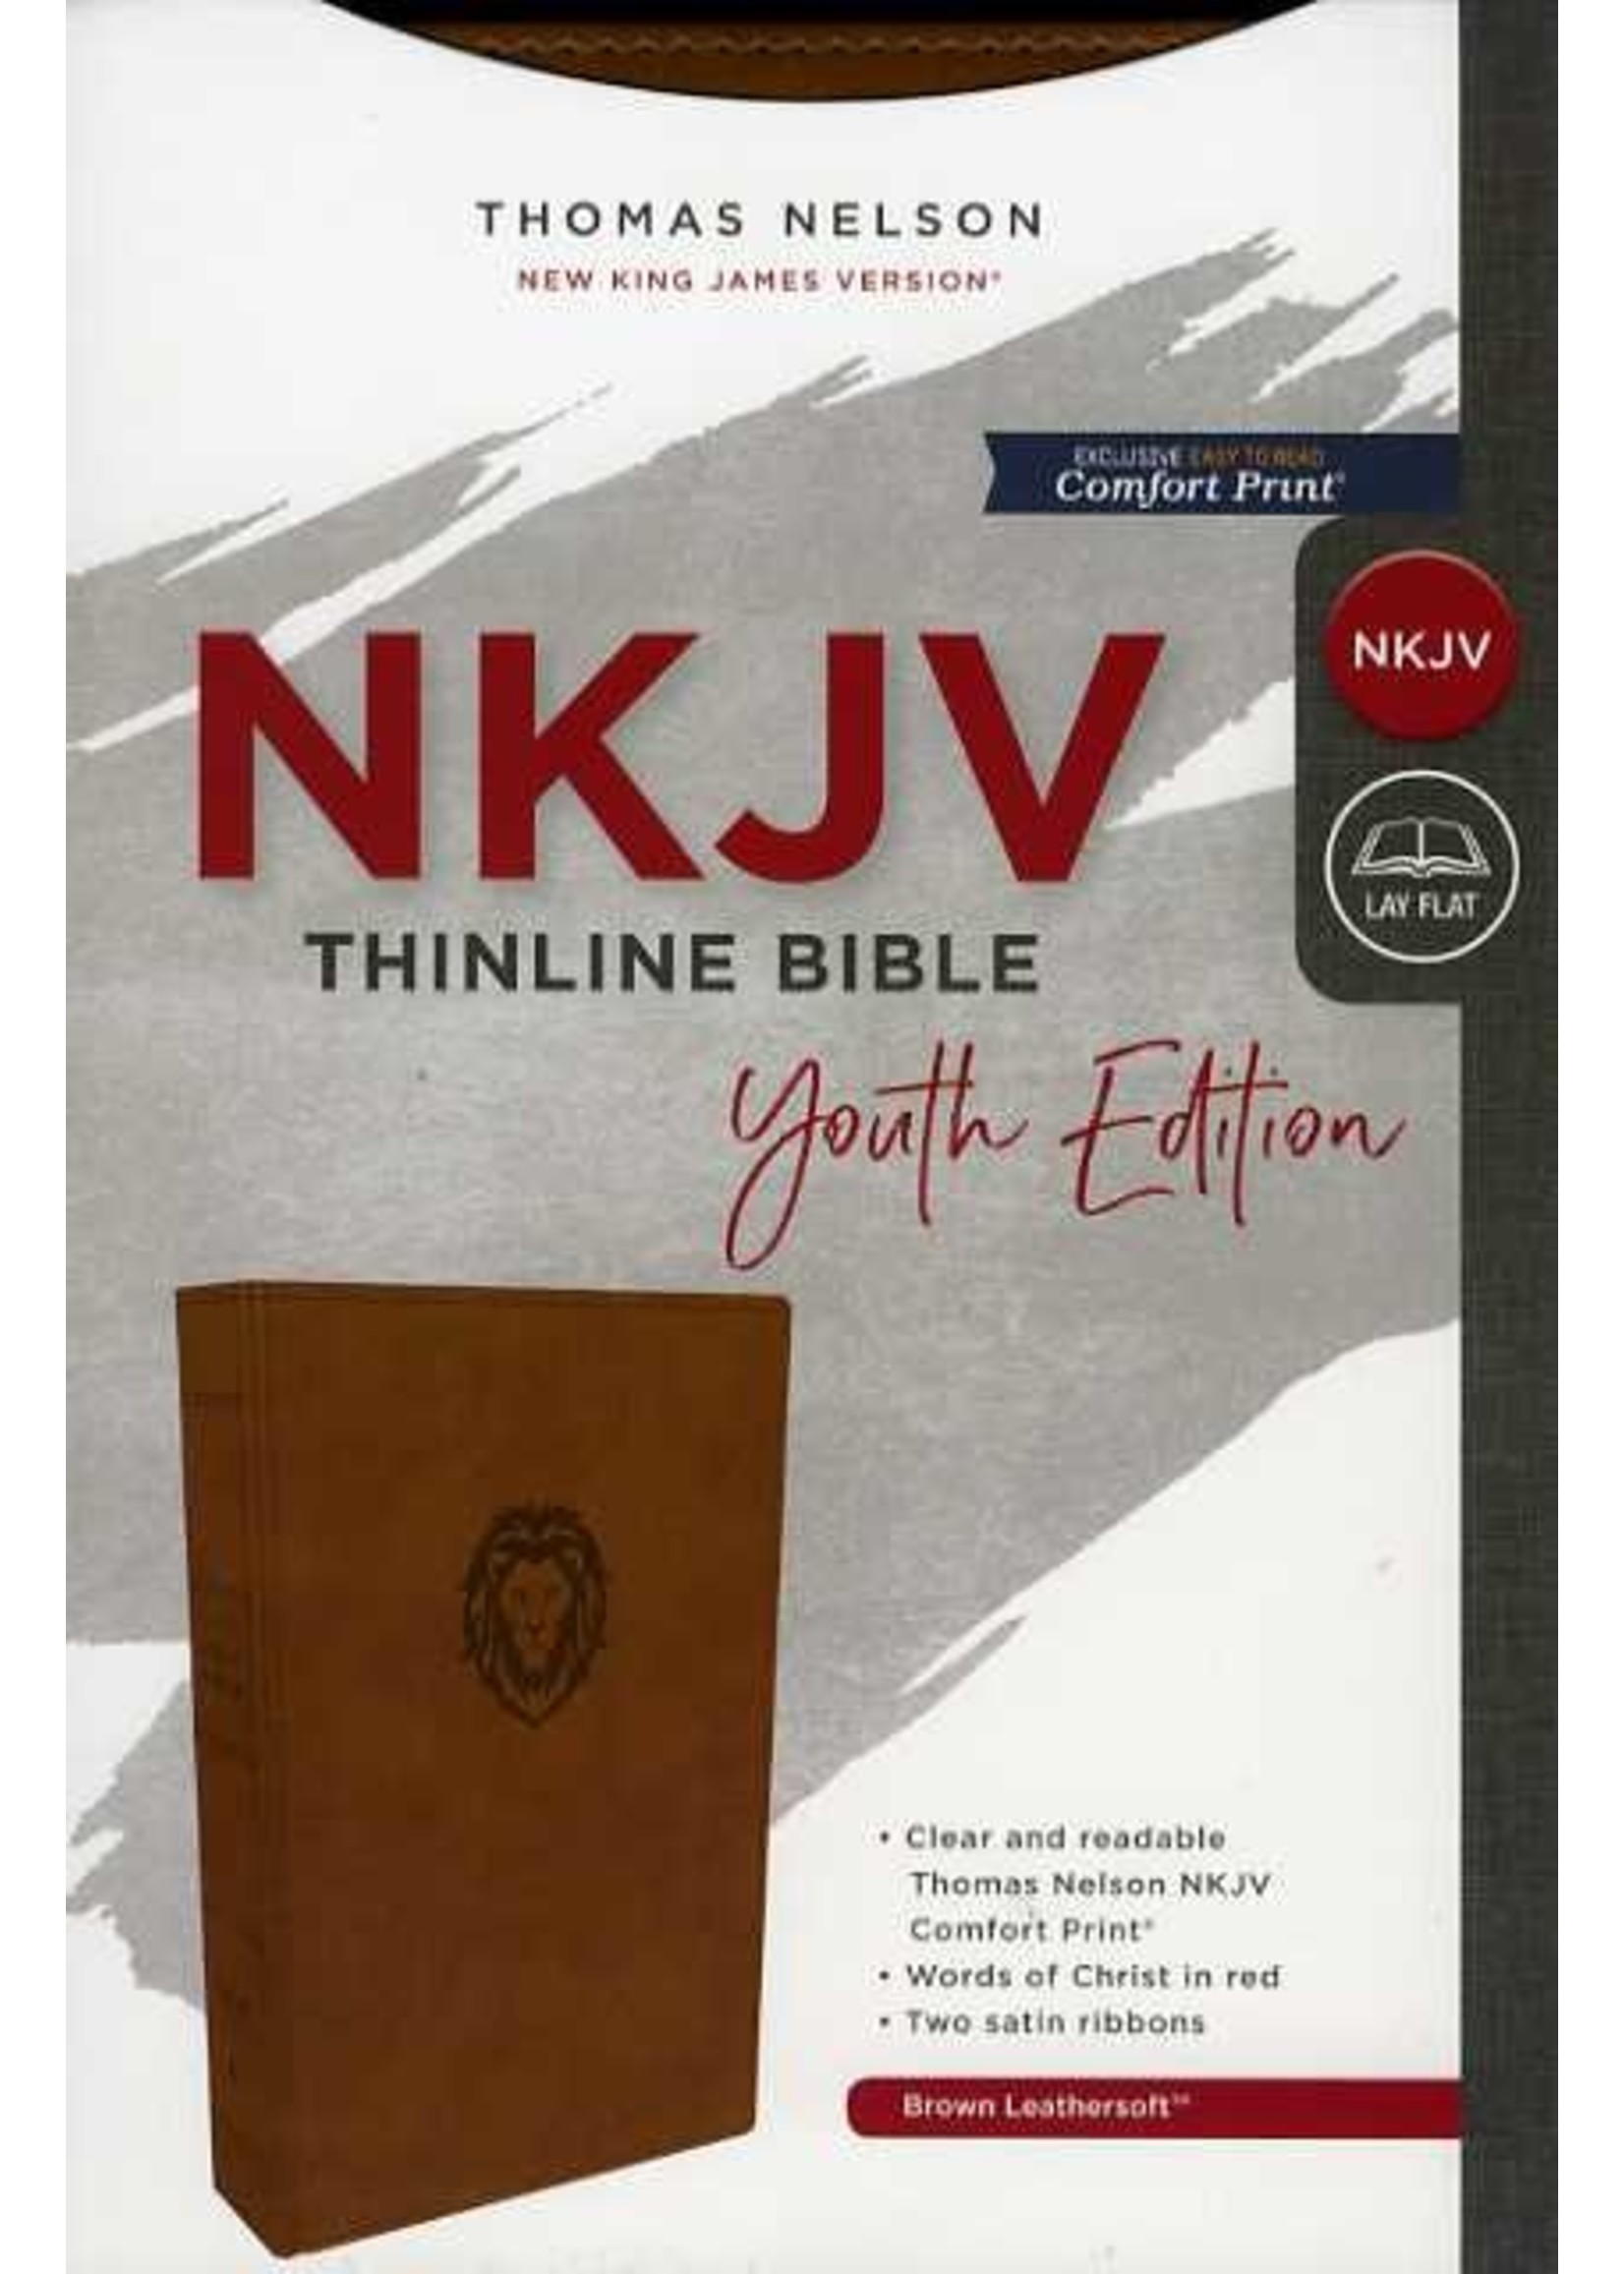 Thomas Nelson NKJV Thinline Bible Youth Edition: Brown Leathersoft - Thomas Nelson